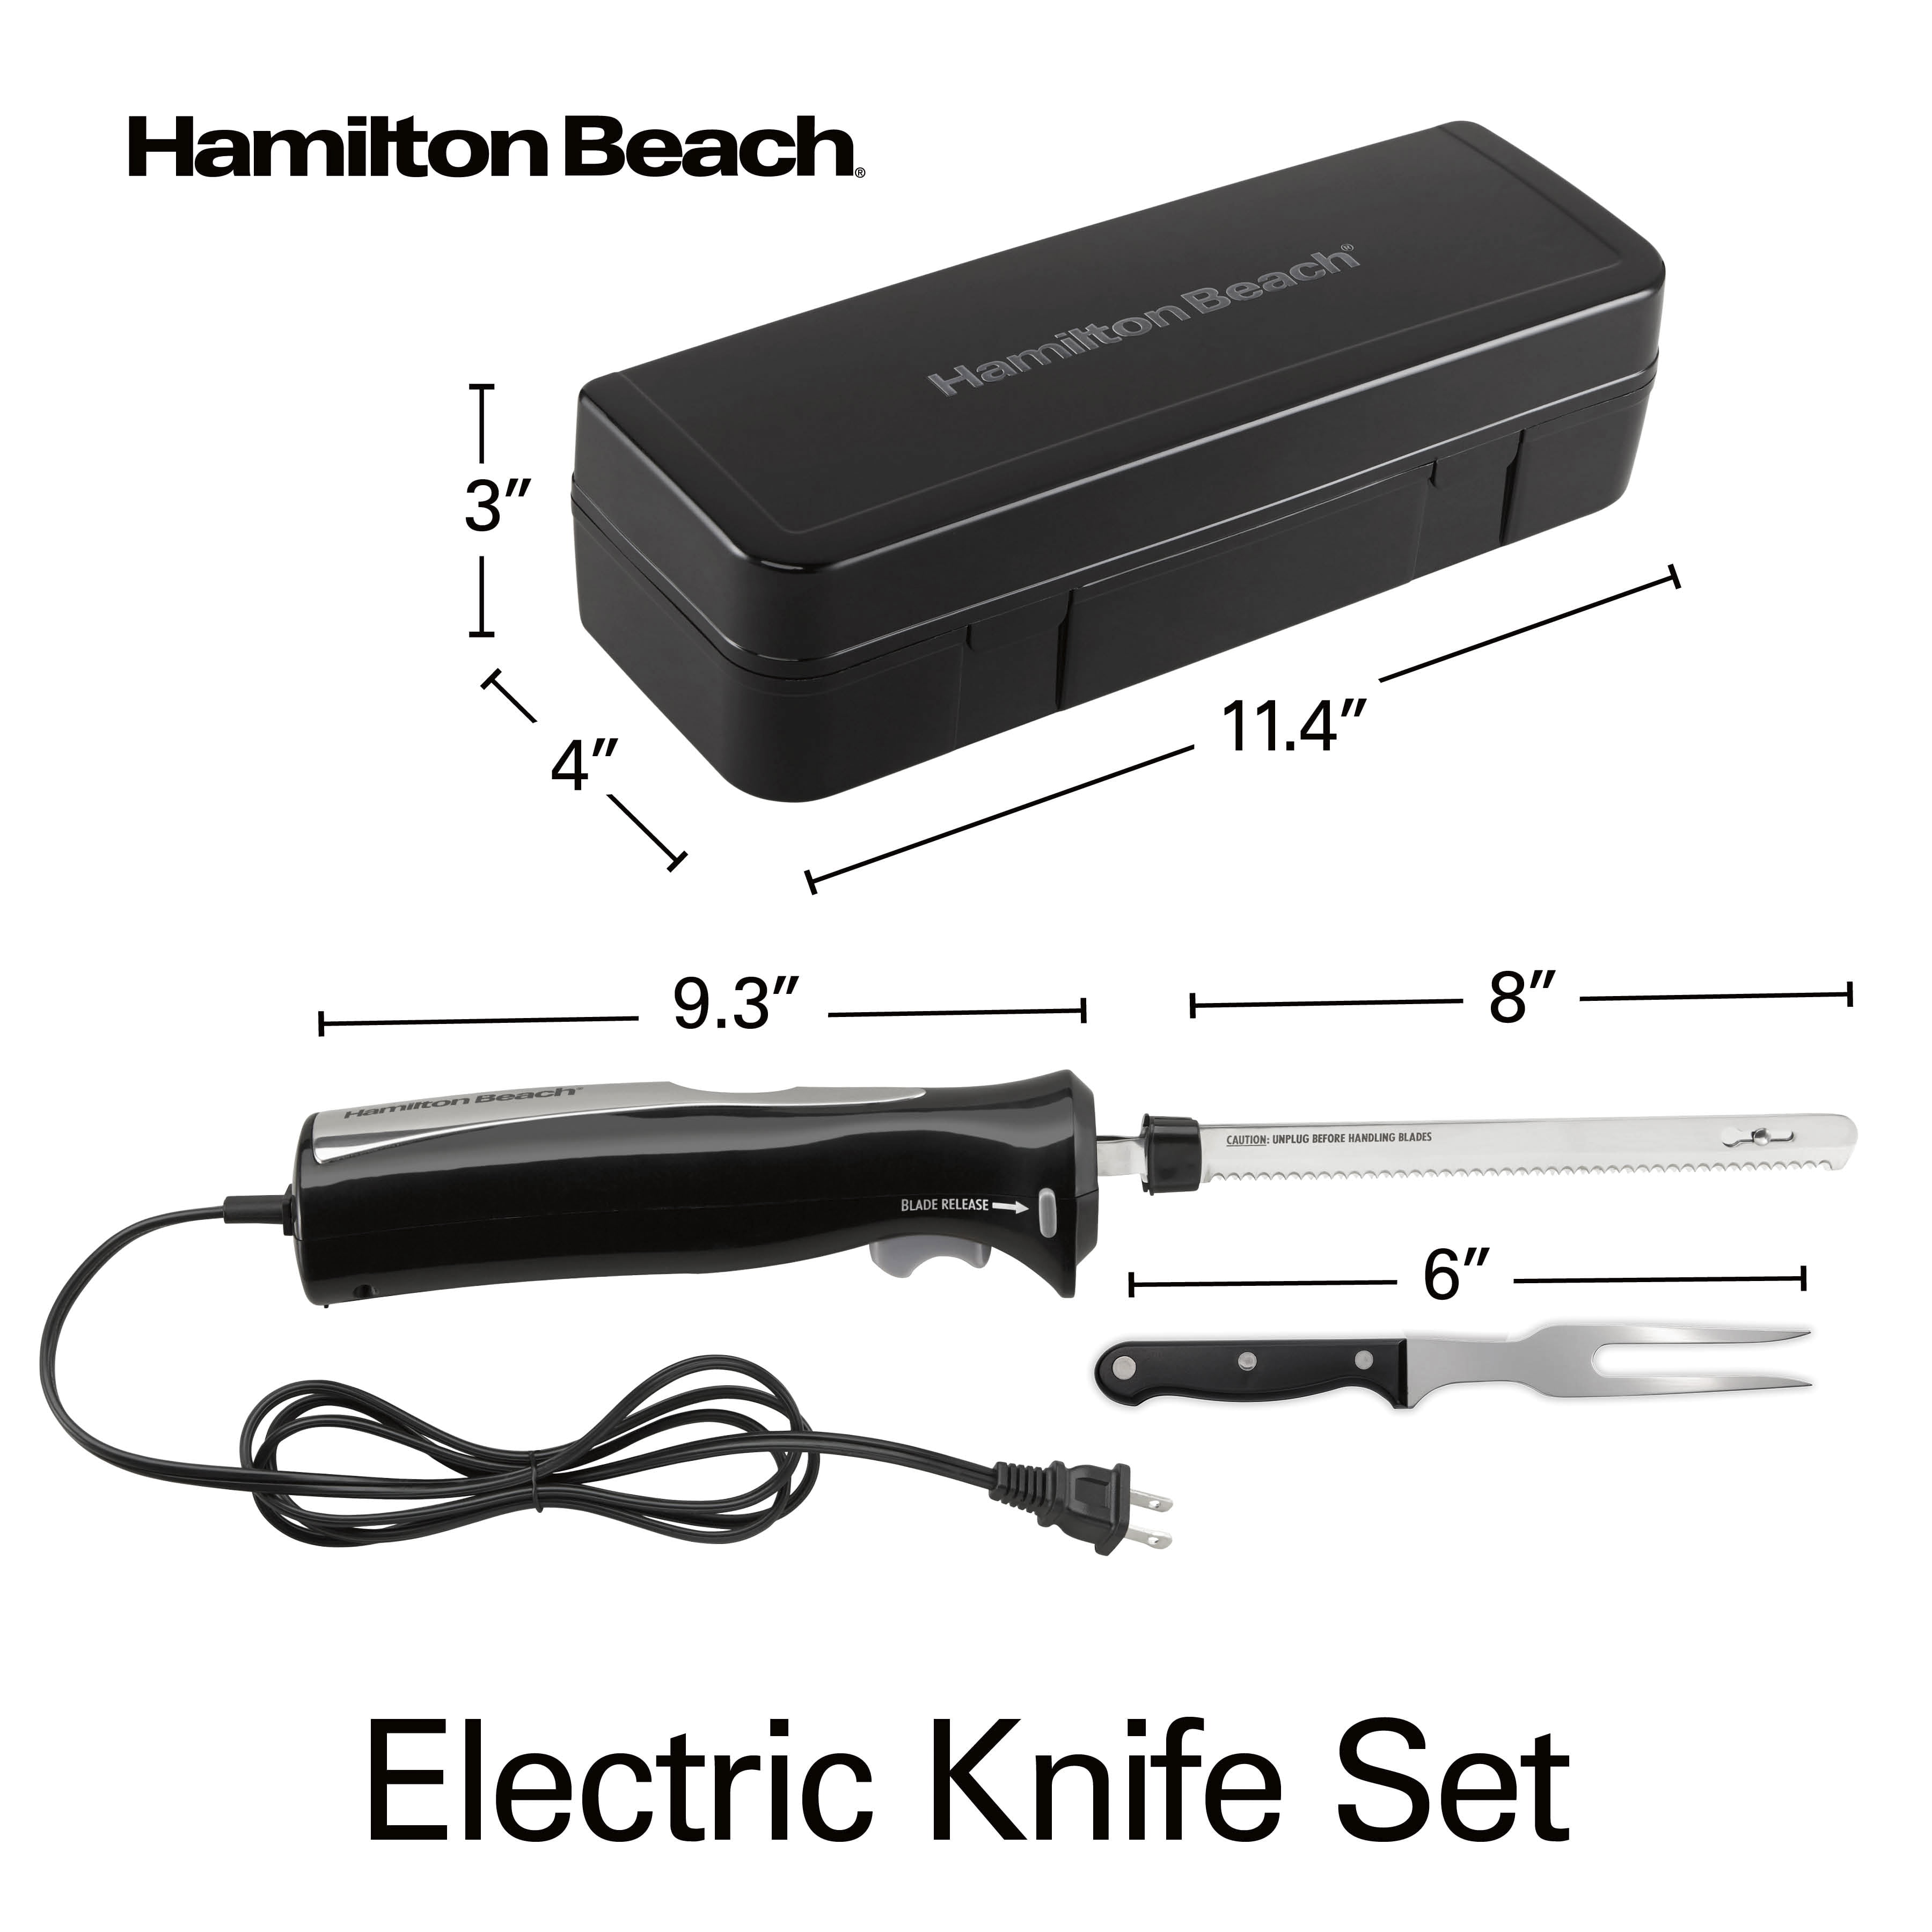 Hamilton Beach Electric Knife Set for Carving Meats, Poultry, Bread,  Crafting Foam & More, Reciprocating Serrated Stainless Steel Blades,  Ergonomic